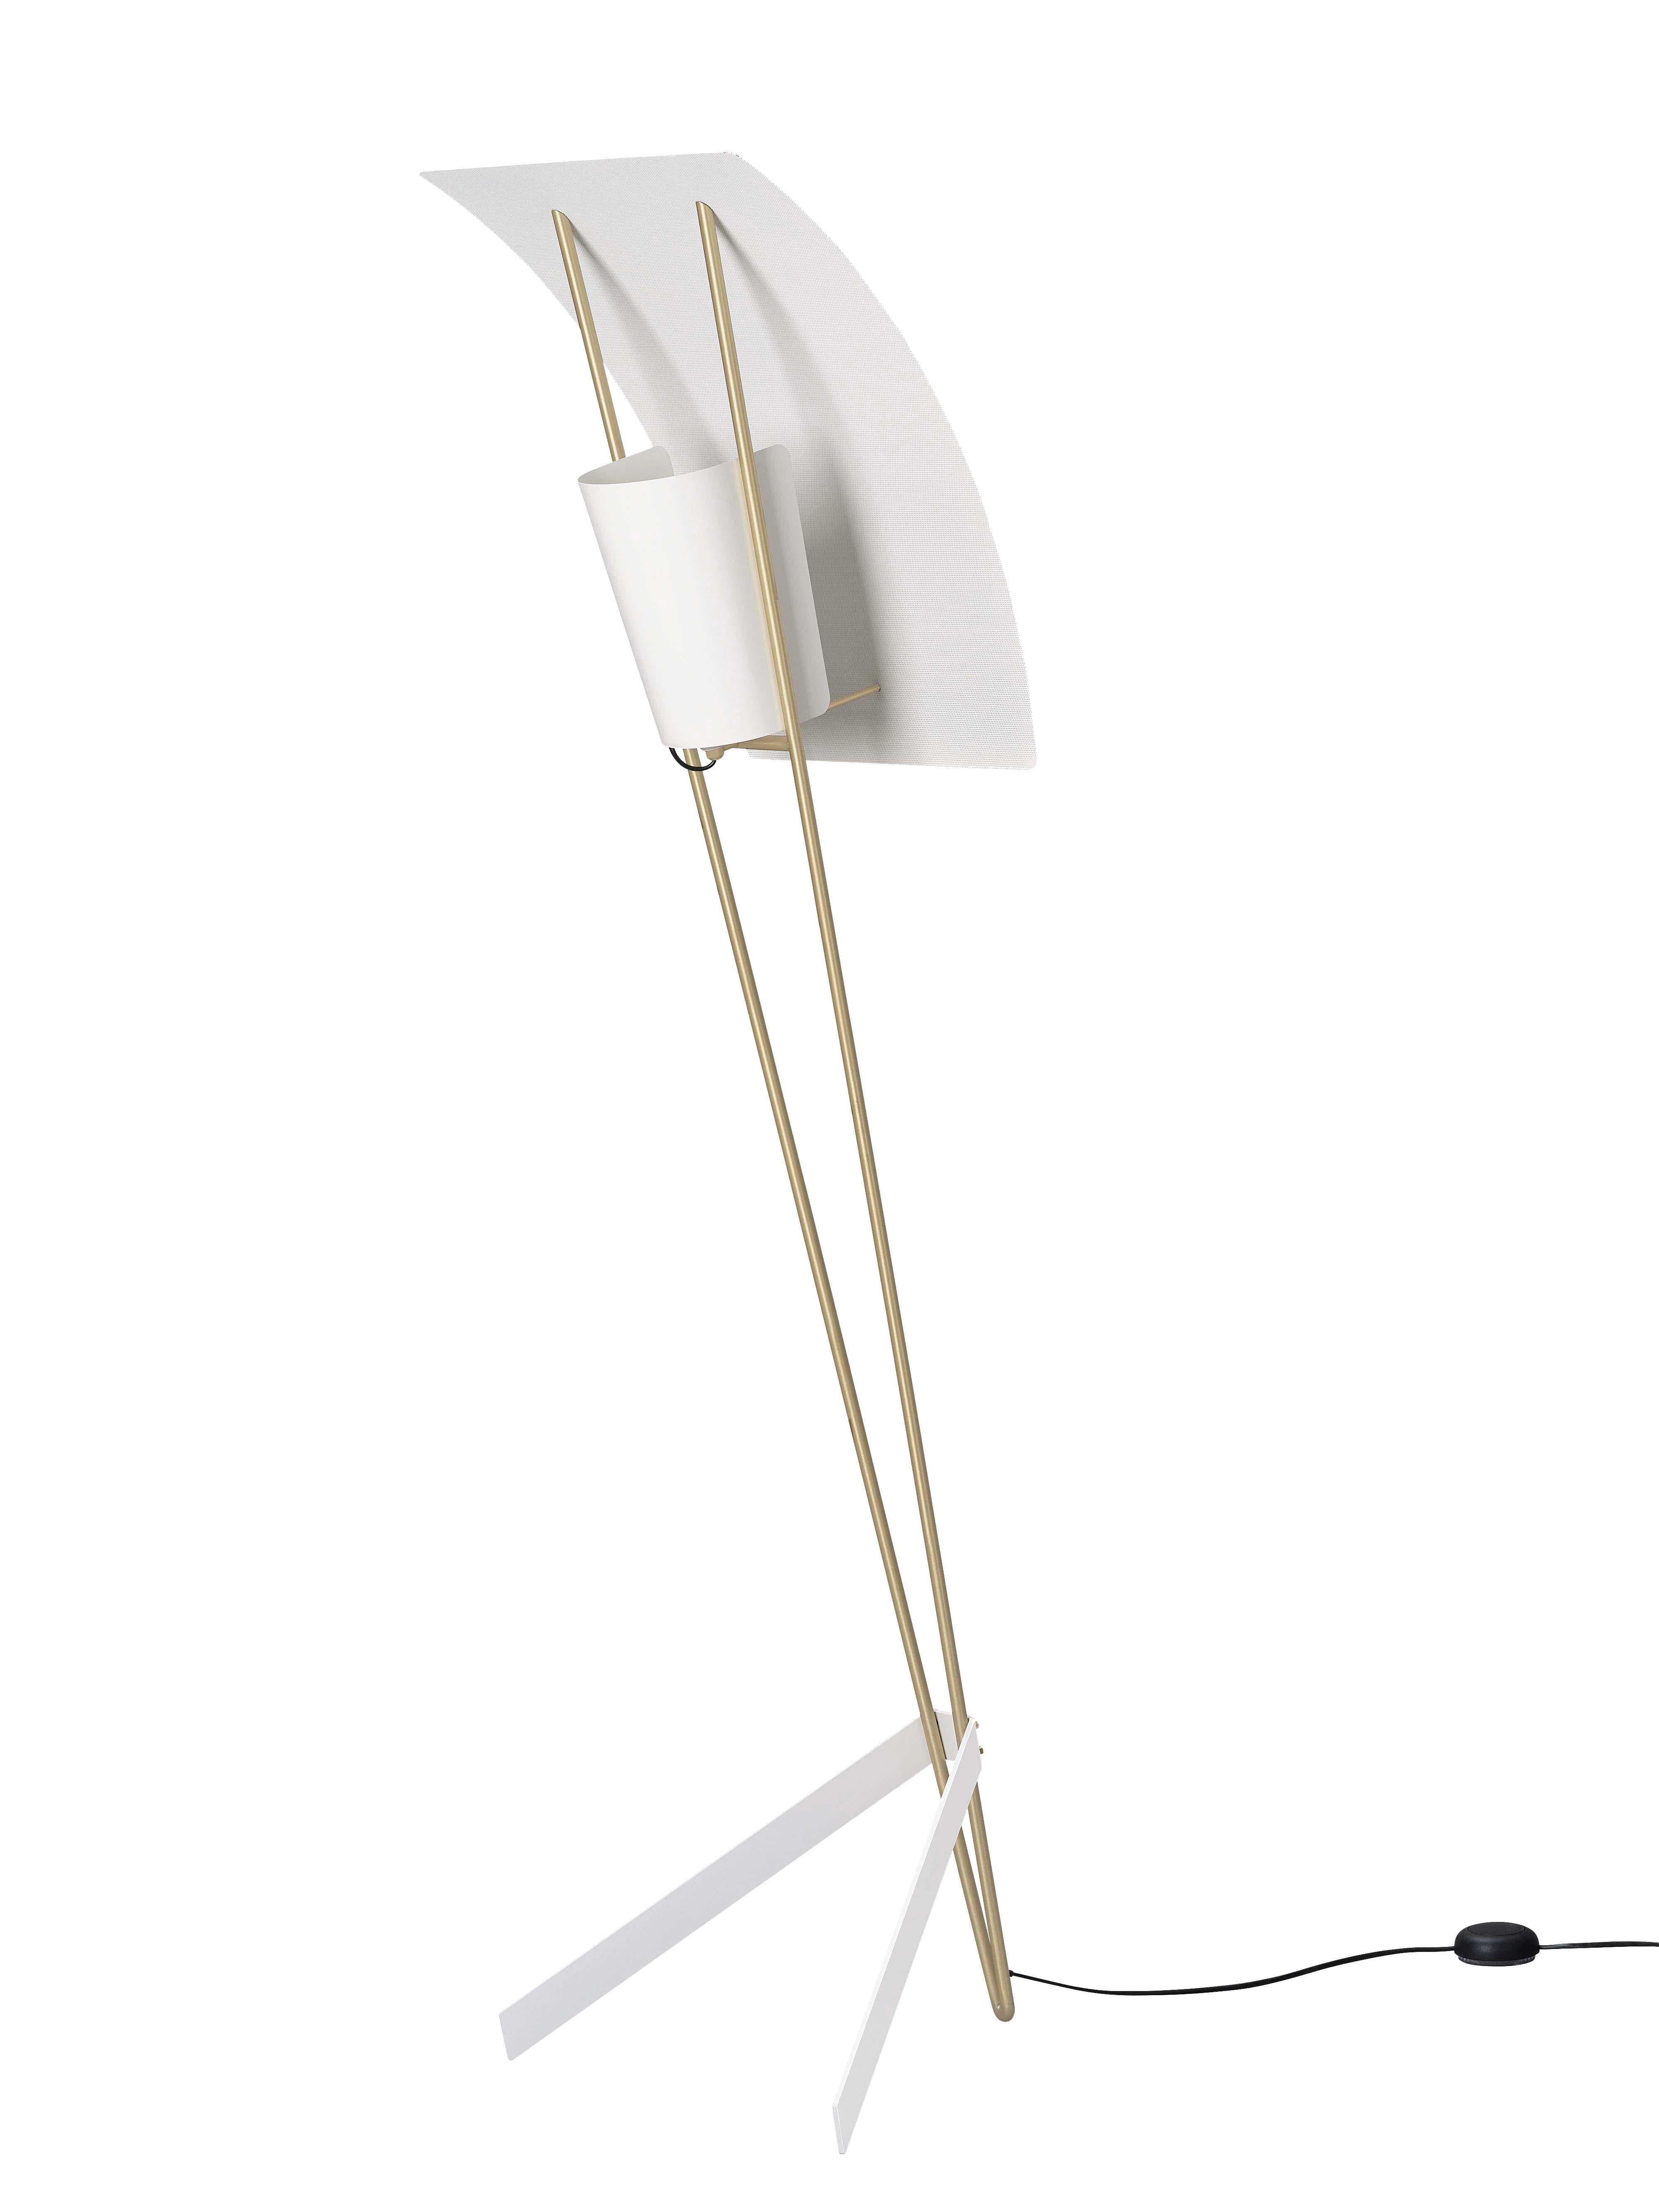 Pierre Guariche Kite floor lamp in white for Sammode Studio. 

Designed by Pierre Guariche in 1958, this iconic floor lamp is newly produced in an authorized re-edition by Sammode Studio in France embracing many of the same small-scale manufacturing